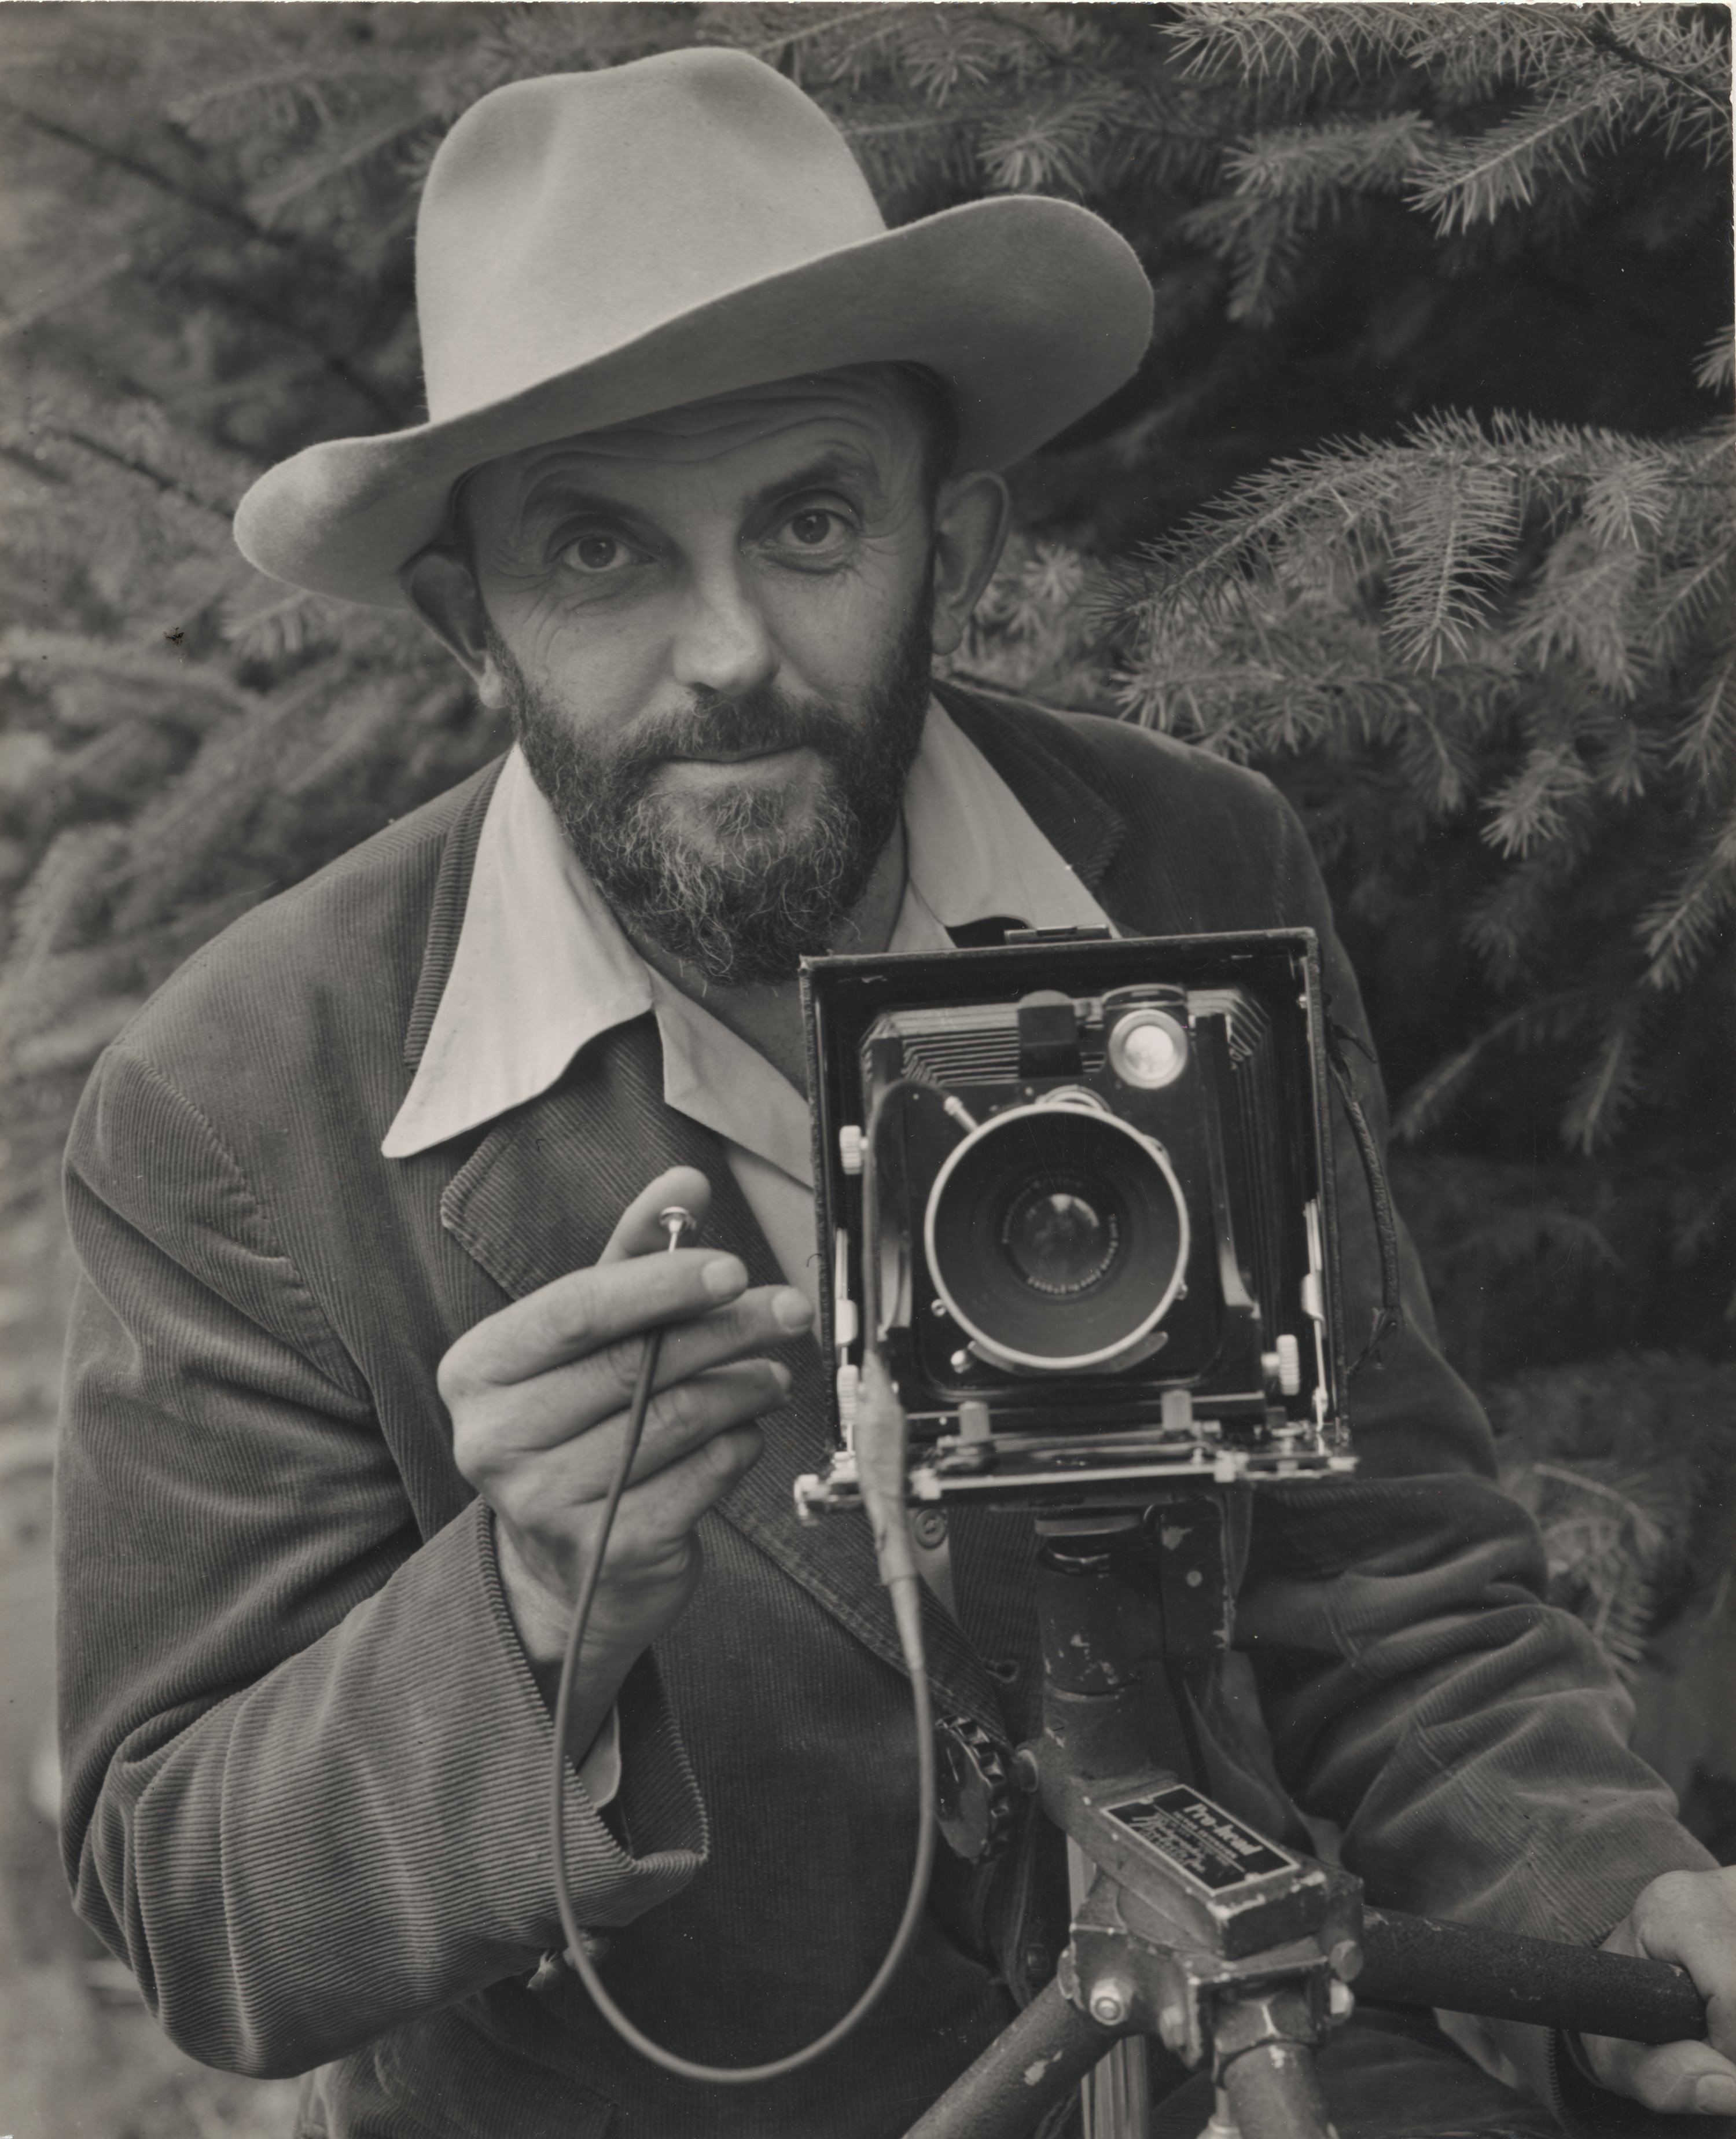 Ansel Adams stands behind a large camera wearing a wide-brimmed hat.